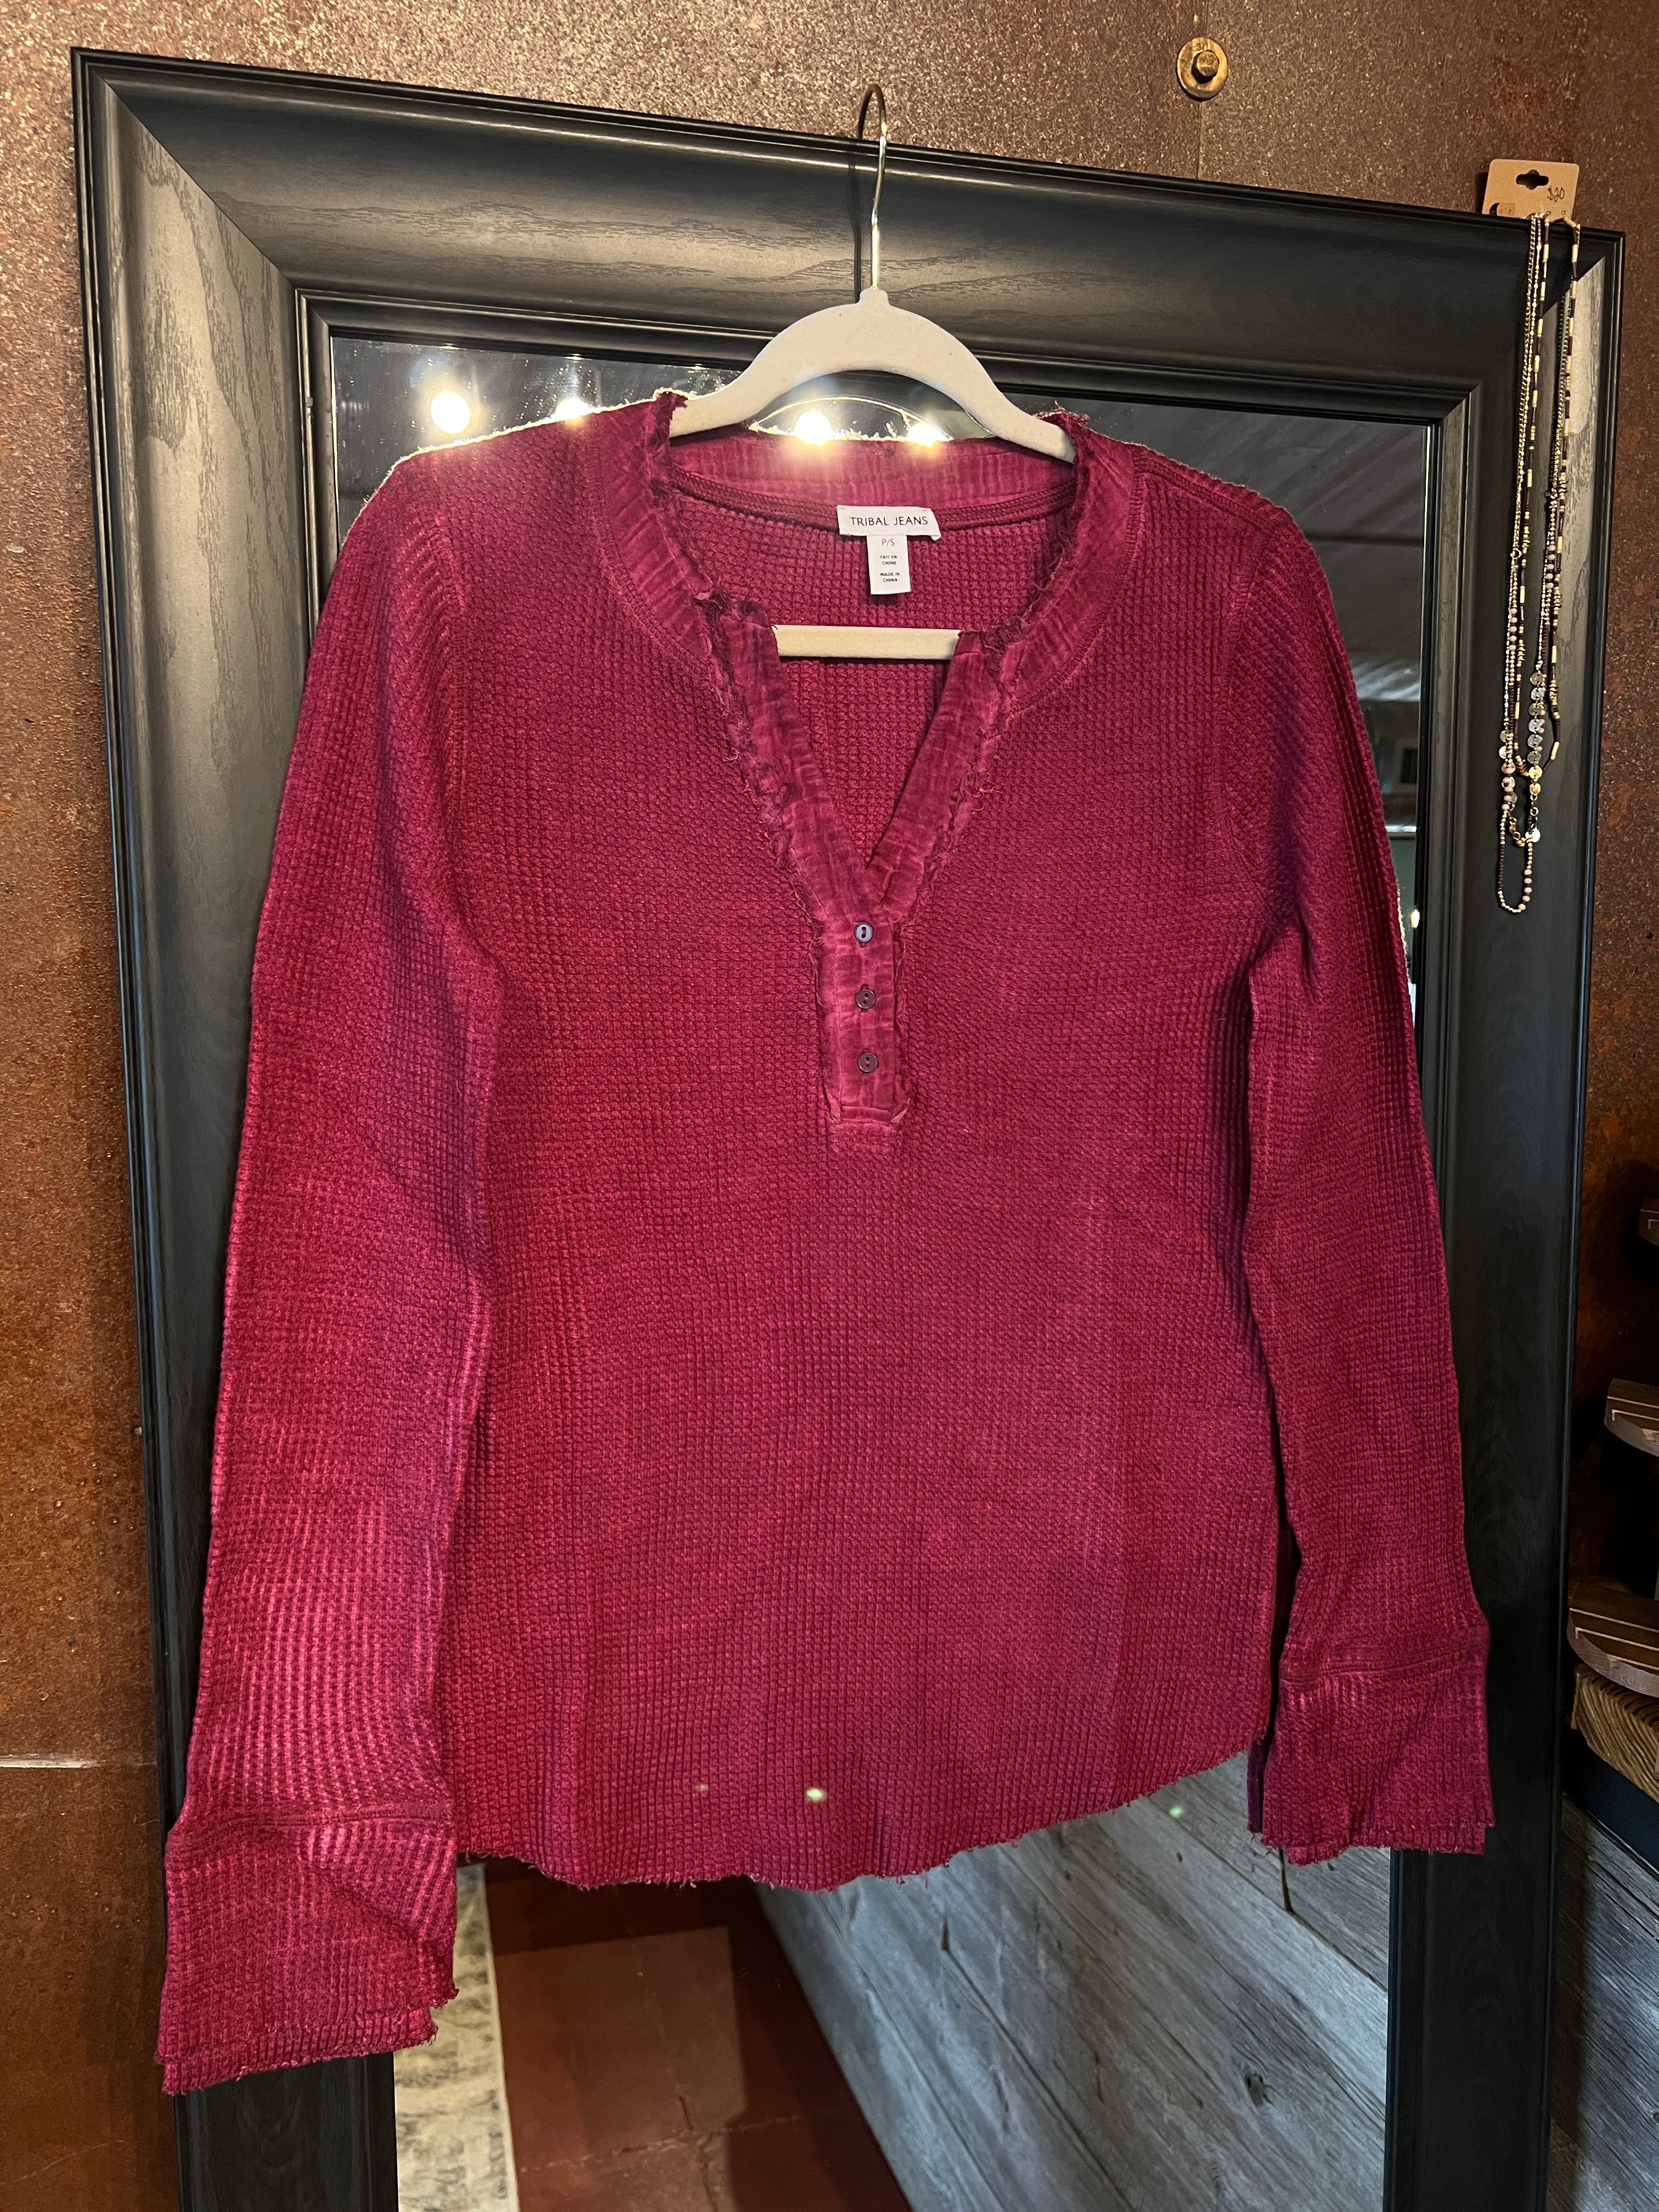 Tribal Top - V-Neck Henley - Red Plum - XLARGE – Cloth